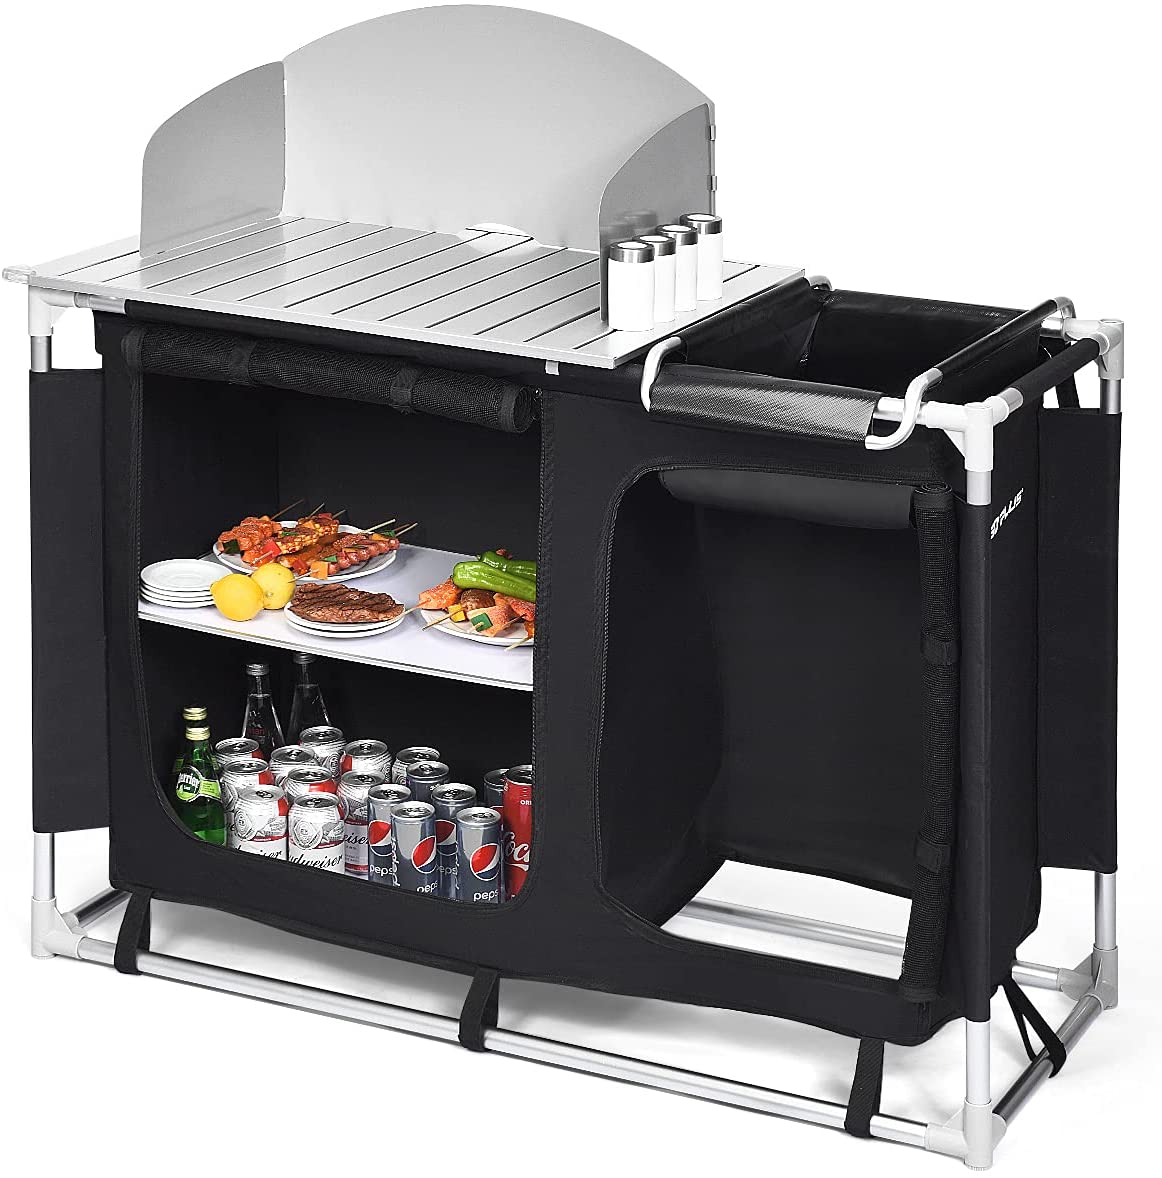 Outsunny Portable Fold-up Camp Kitchen with Windscreen, 6' : Amazon.co.uk:  Sports & Outdoors